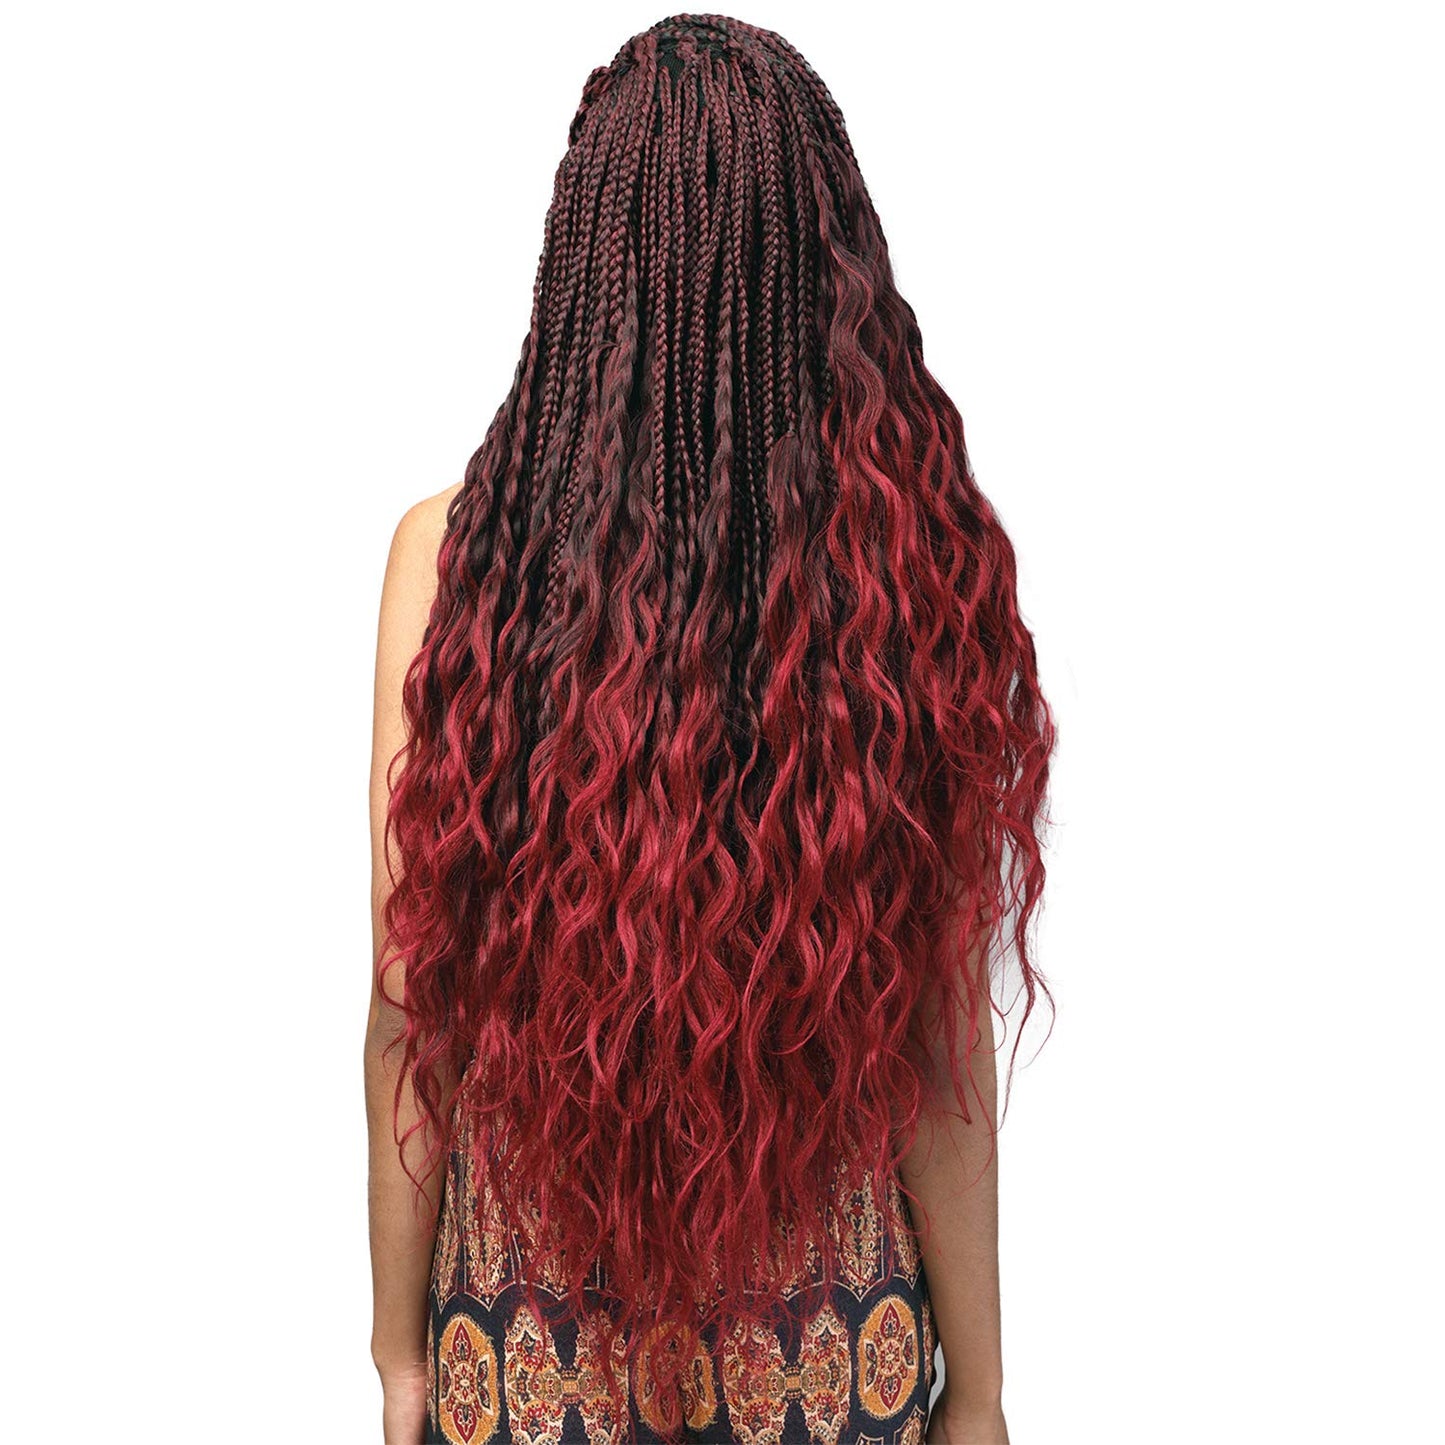 MULTI PACK DEALS! Bobbi Boss Synthetic Hair Braids Pre-Feathered 3X King Tips Body Wave 28" (1-PACK, T4/30)